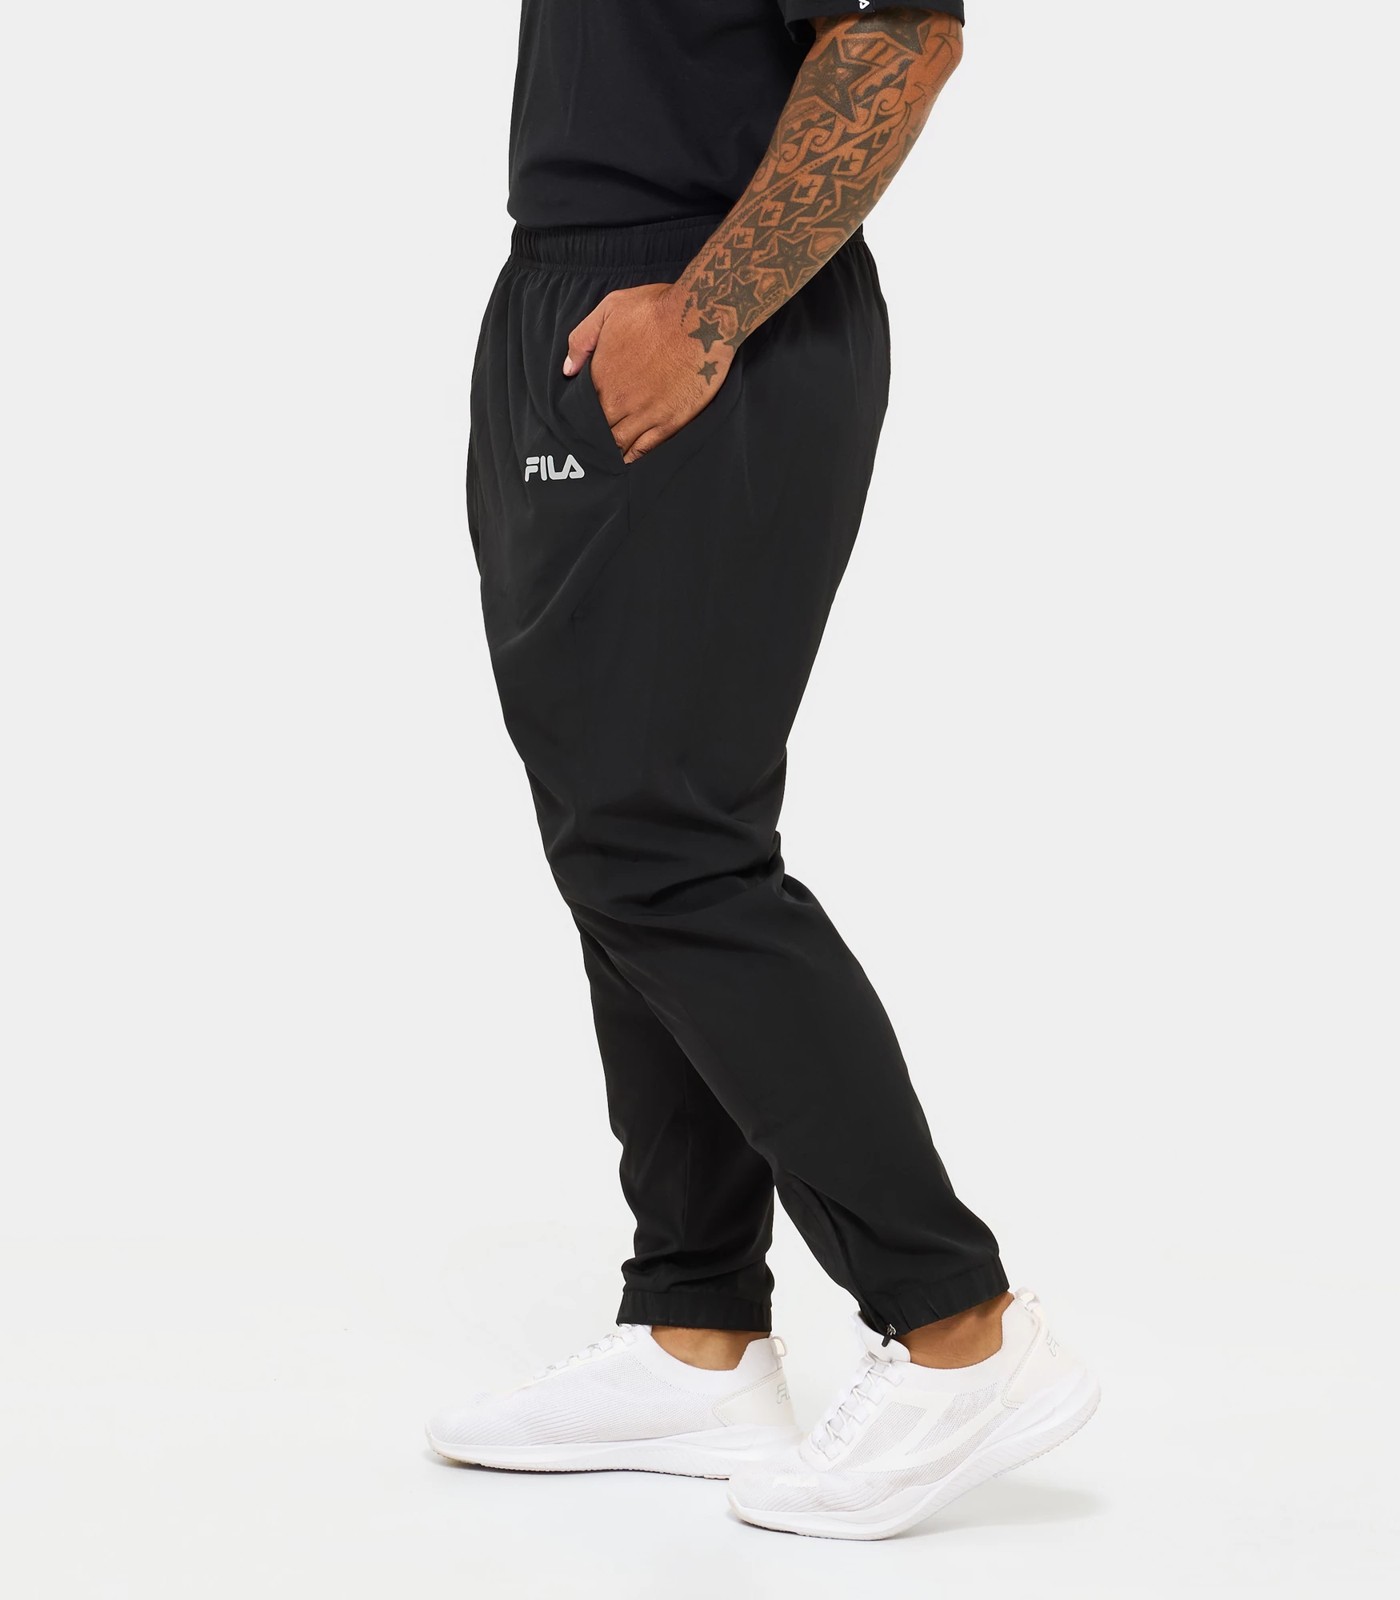 Mens fila track pants Urban Outfitters